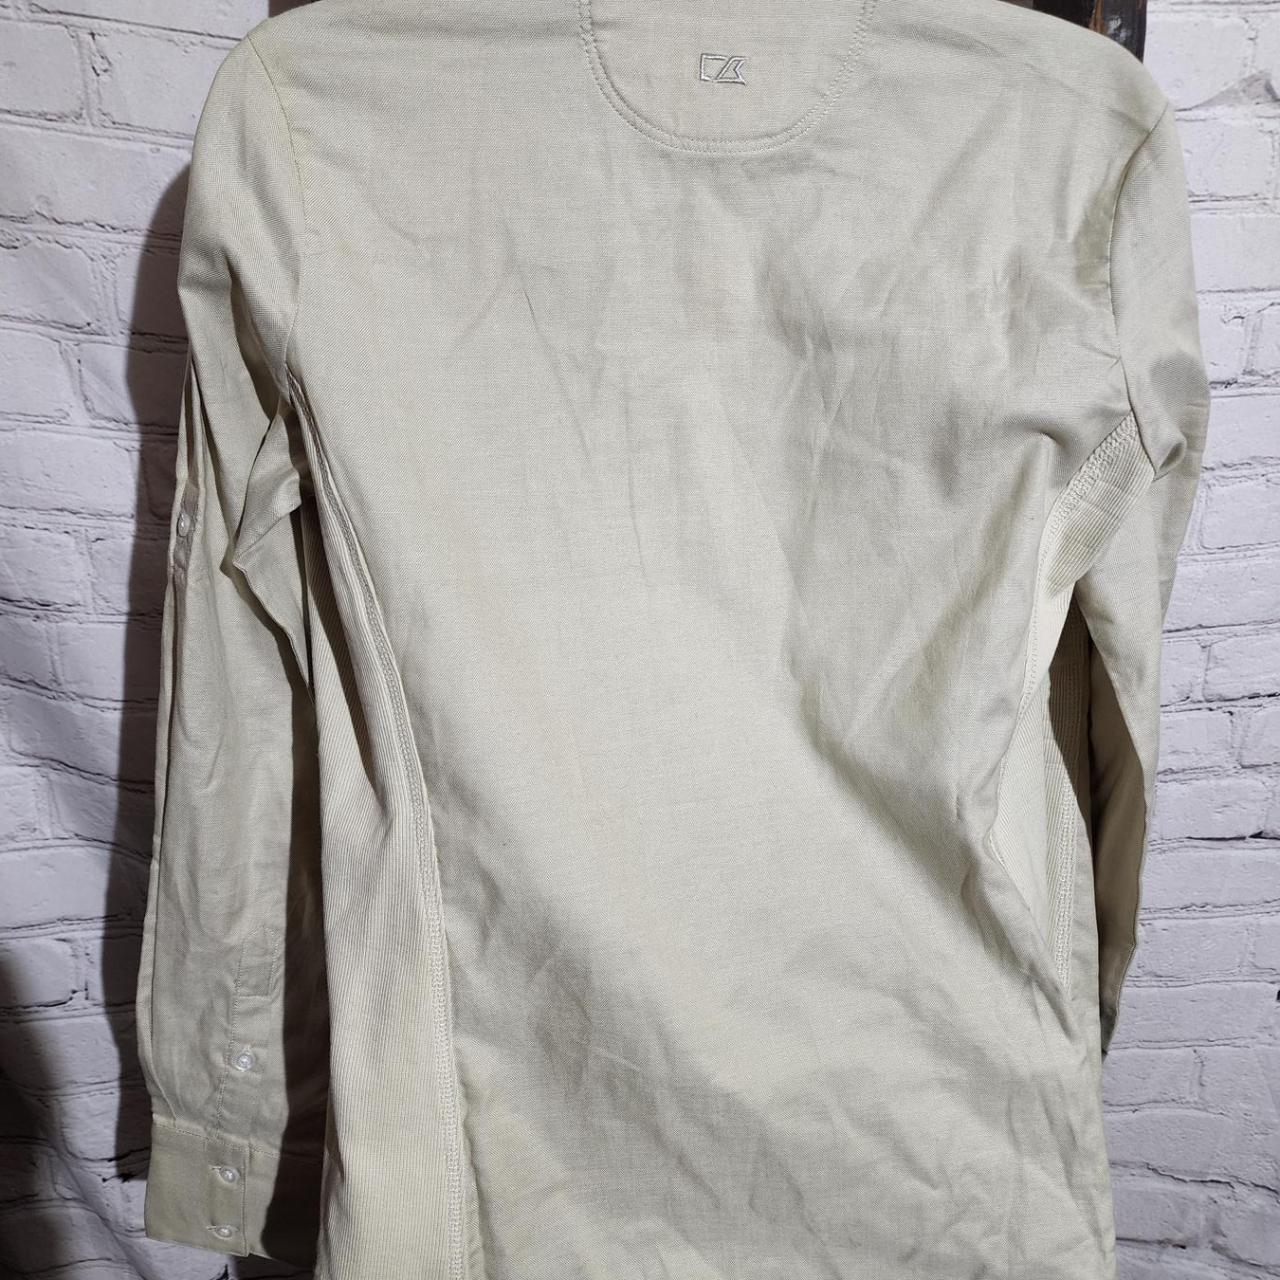 Product Image 2 - NWT XS Button Front Shirt